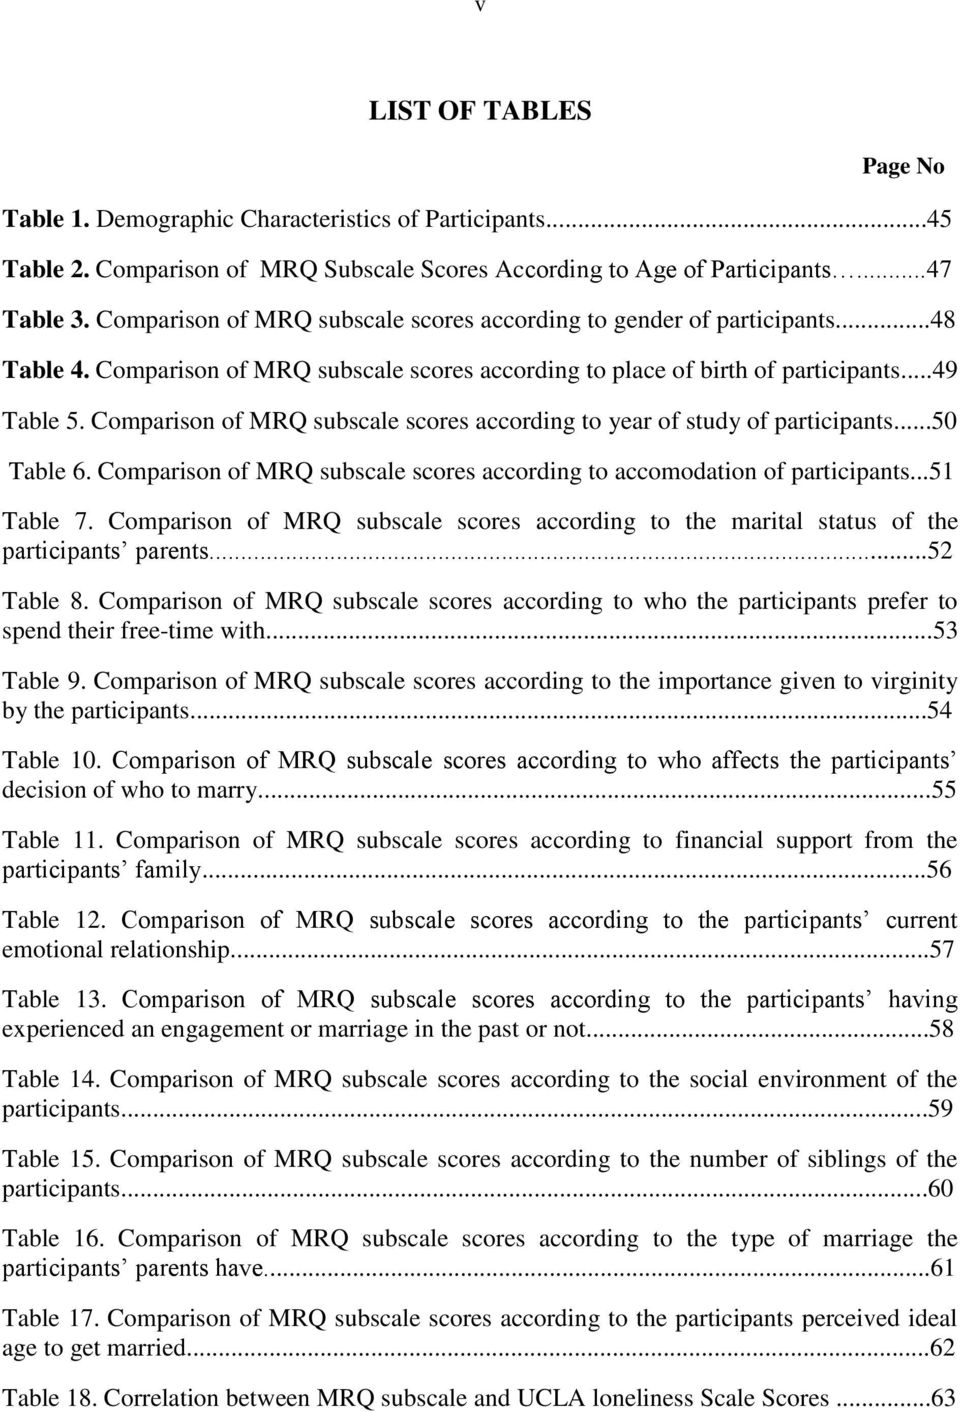 Comparison of MRQ subscale scores according to year of study of participants...50 Table 6. Comparison of MRQ subscale scores according to accomodation of participants...51 Table 7.